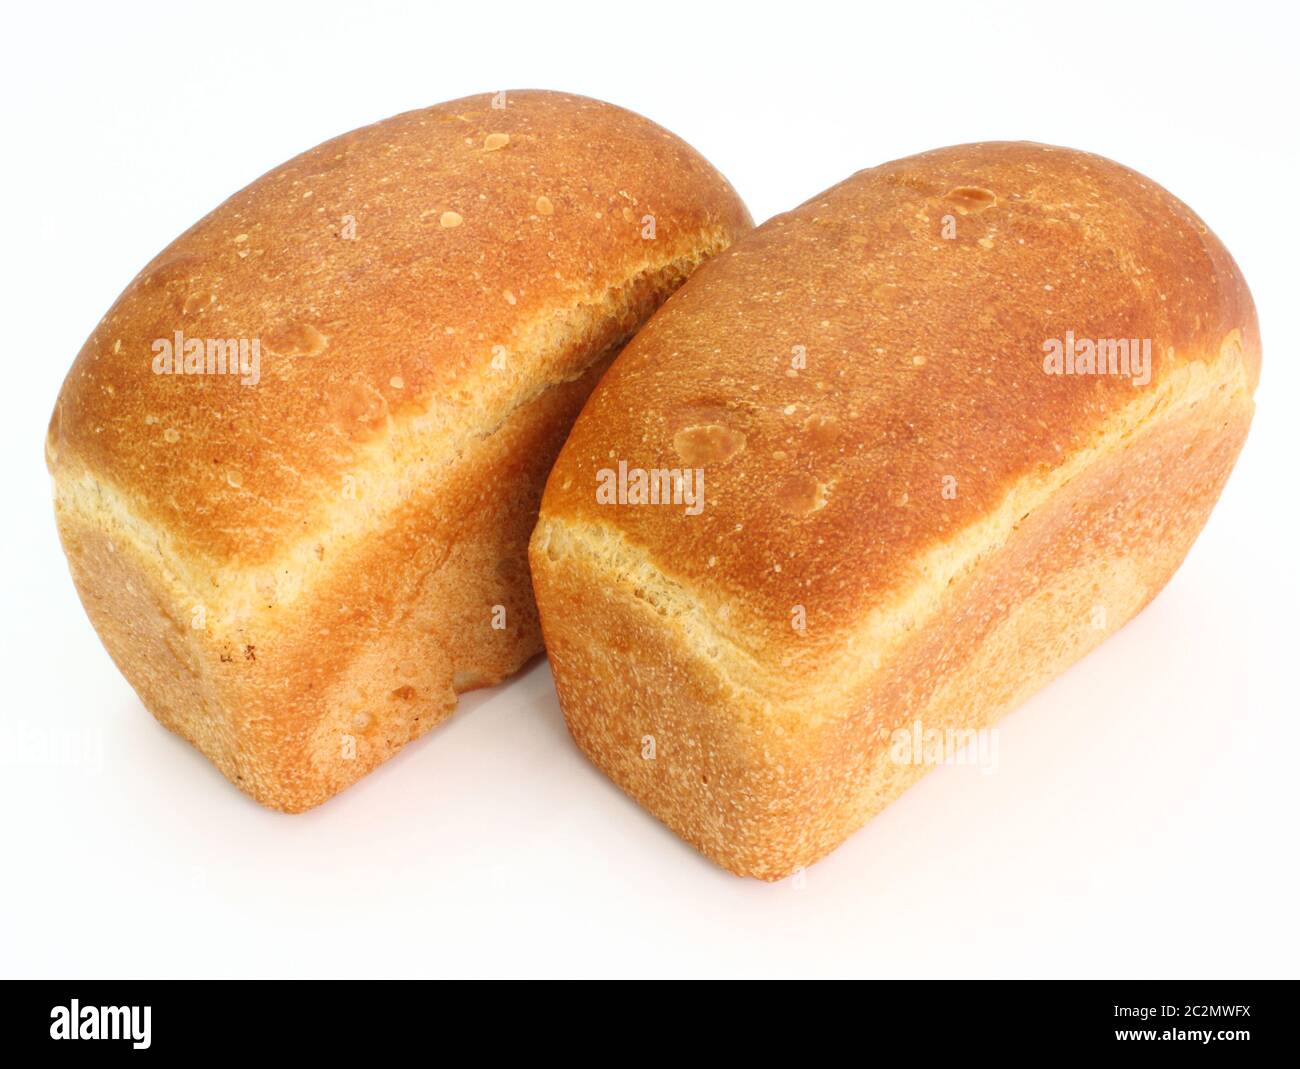 The ruddy long loaf of bread Stock Photo